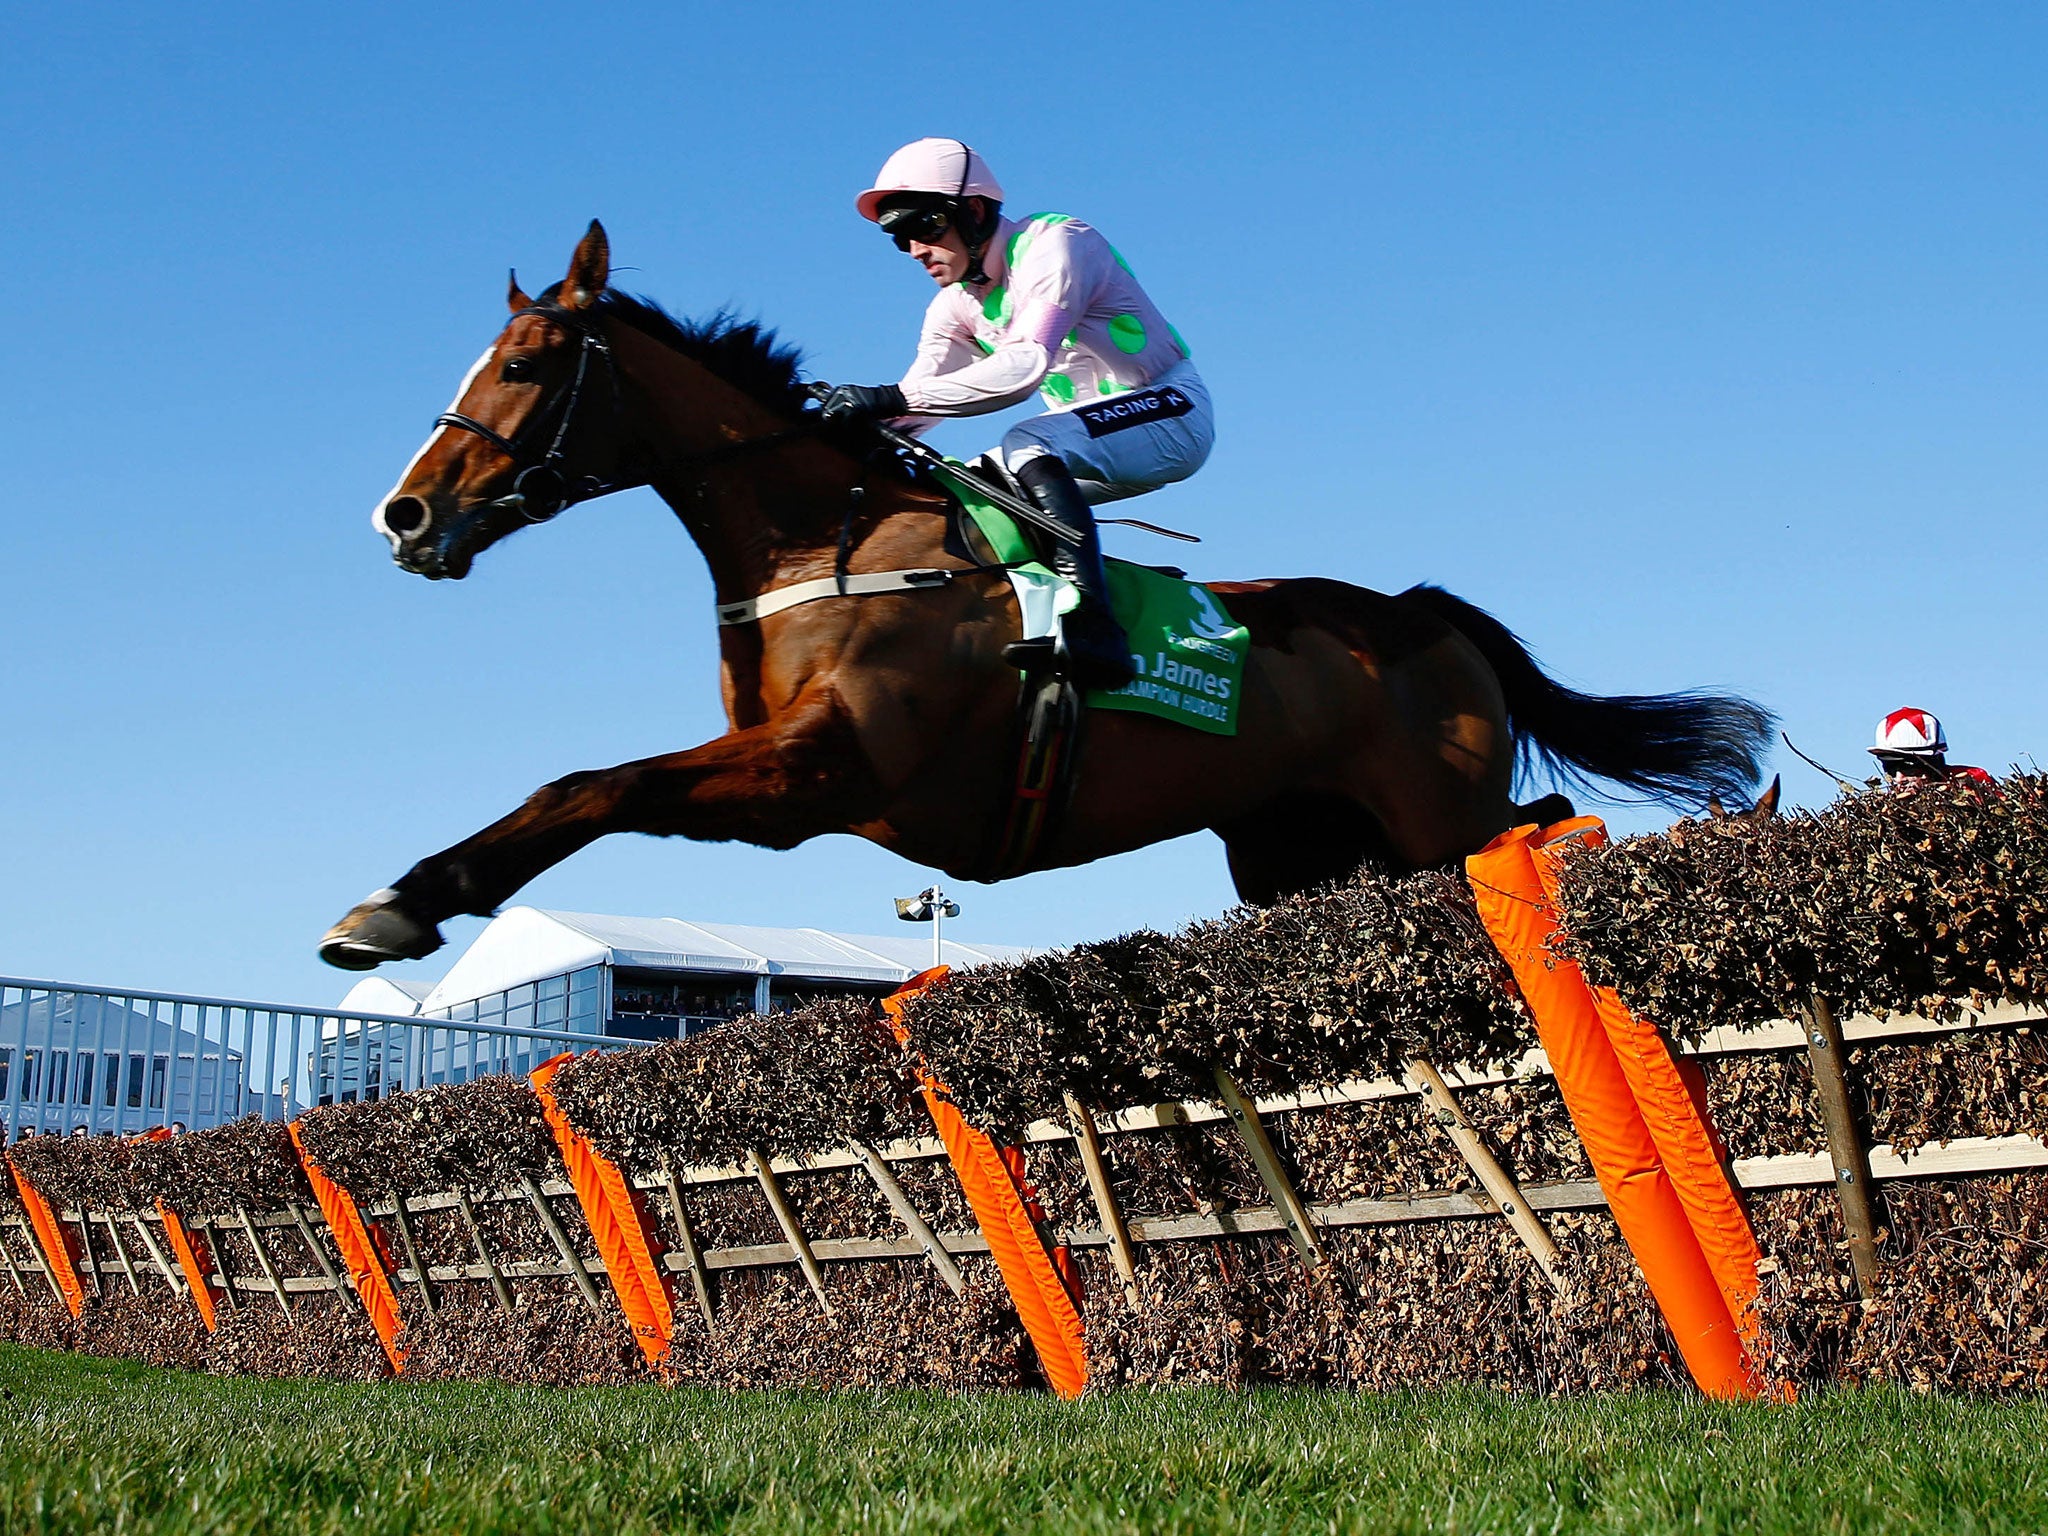 Ruby Walsh on Faugheen jumps the final fence and goes on to win the 15.20 Champion Hurdle Challenge Trophy, in Cheltenham